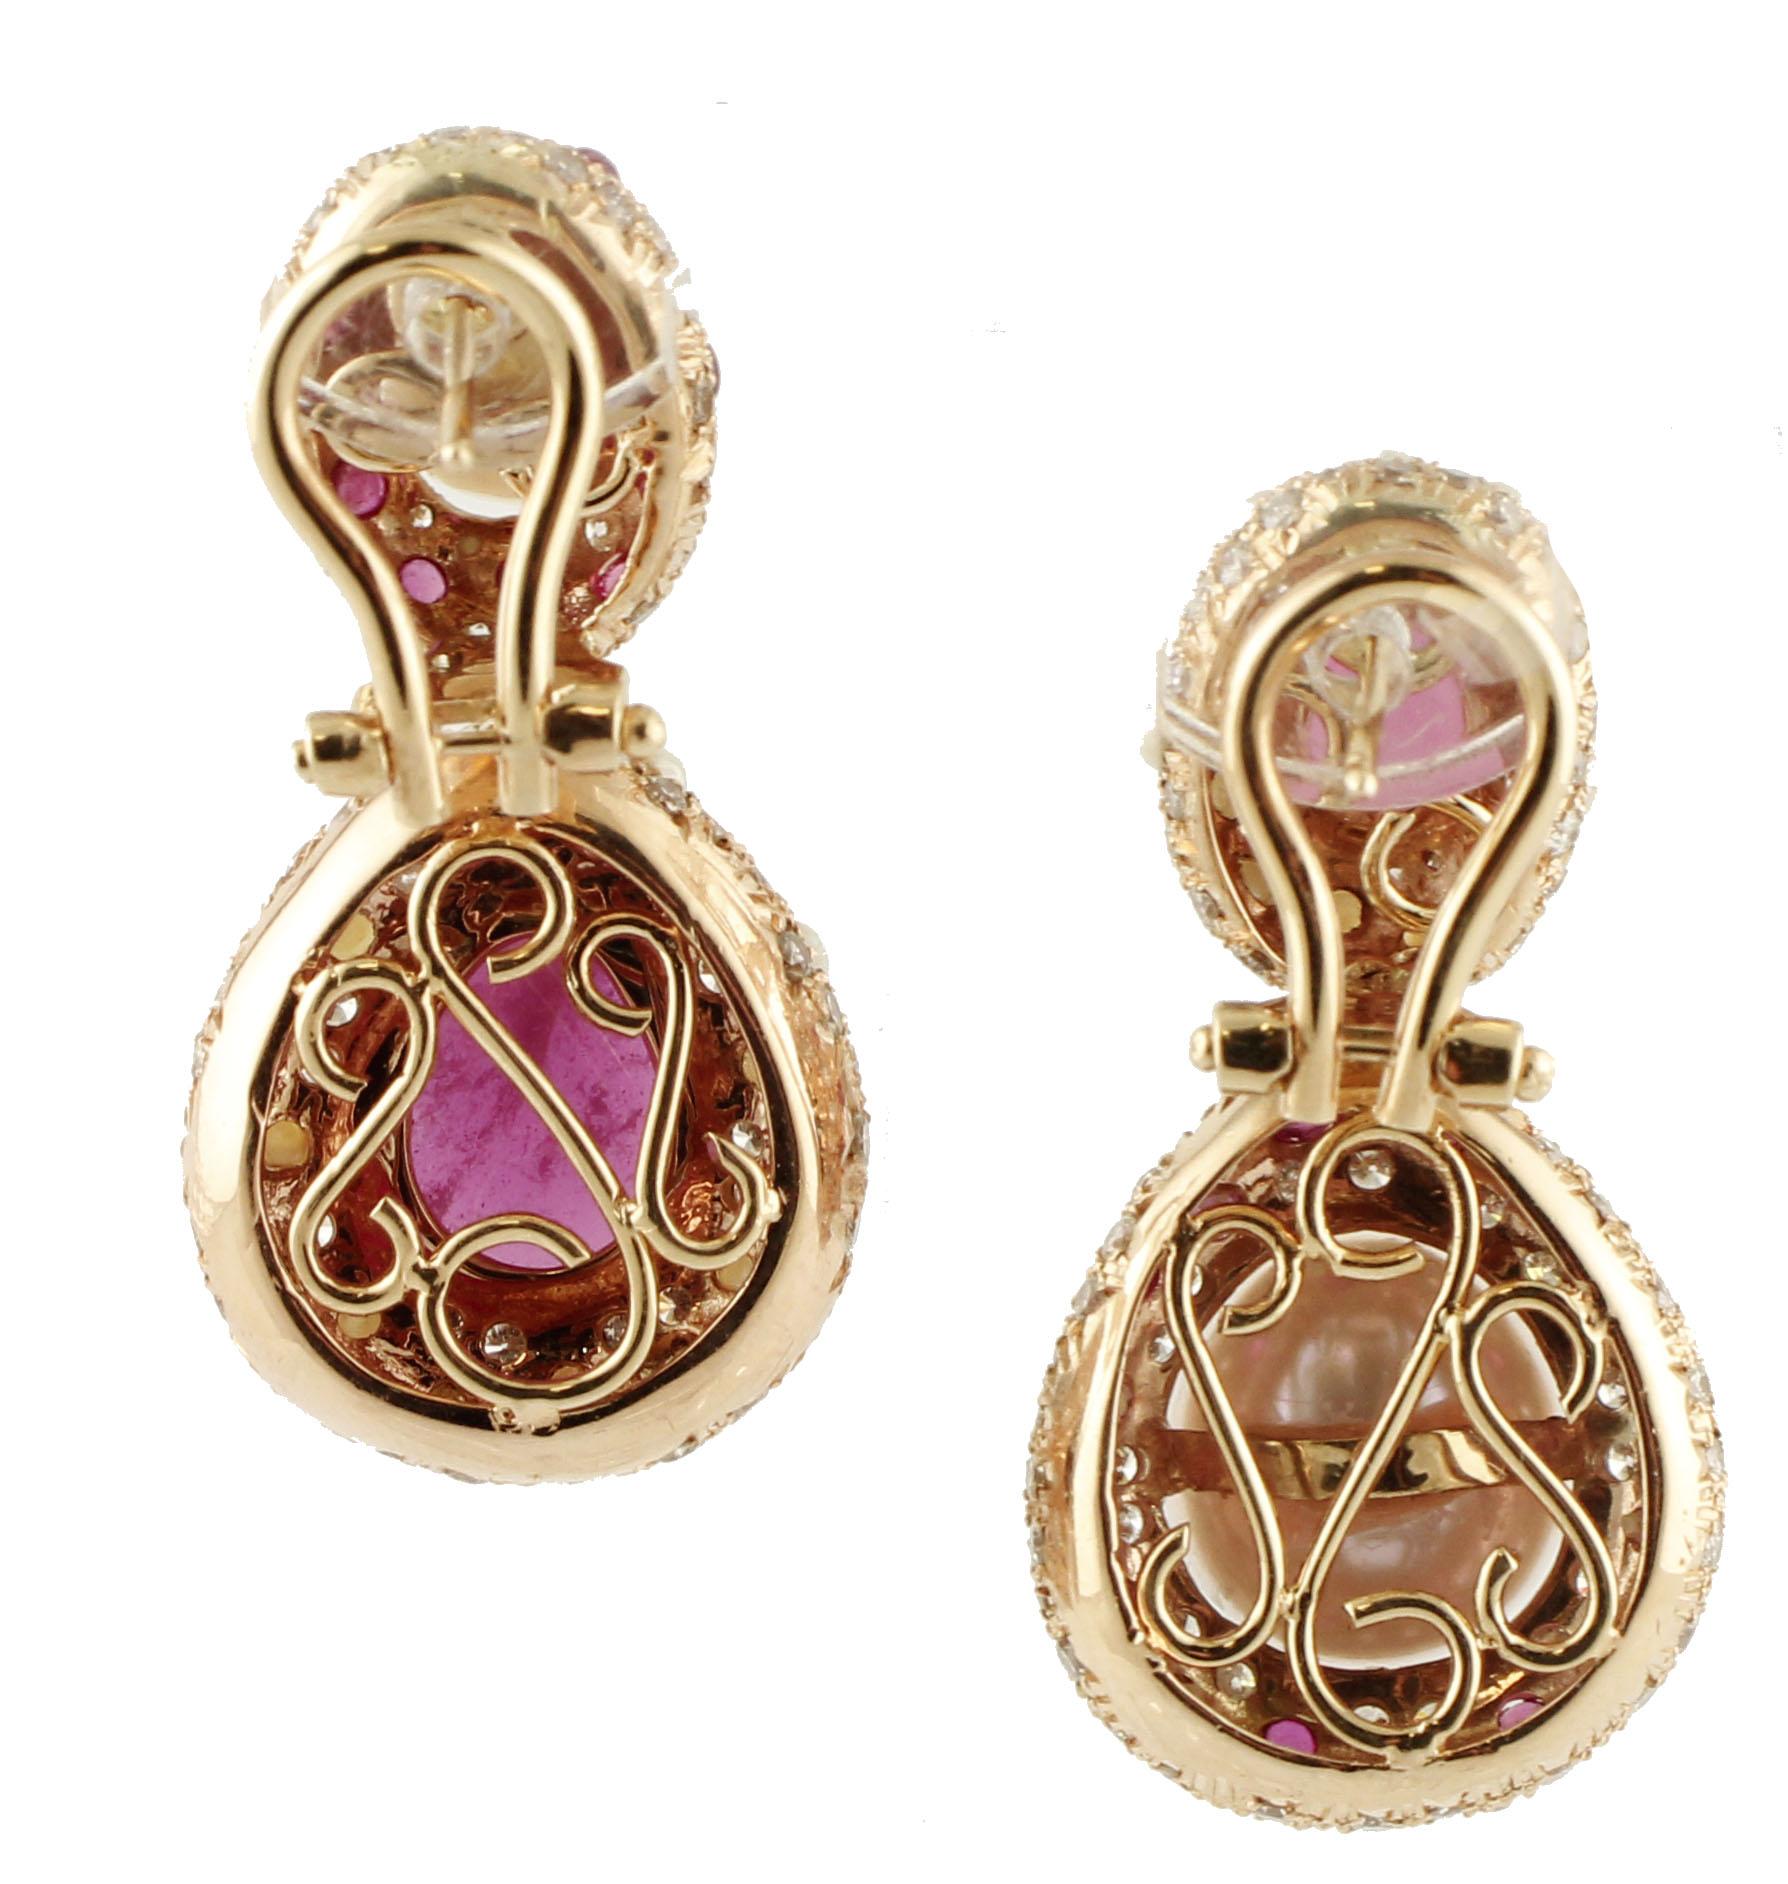 Elegant retro pair of earrings realized in 14k rose gold structure. The earrings feature a specular design: one earring is mounted with a baroque pearl on the top and a drop ruby as pendant, while the other earring is mounted inversely, with ruby at